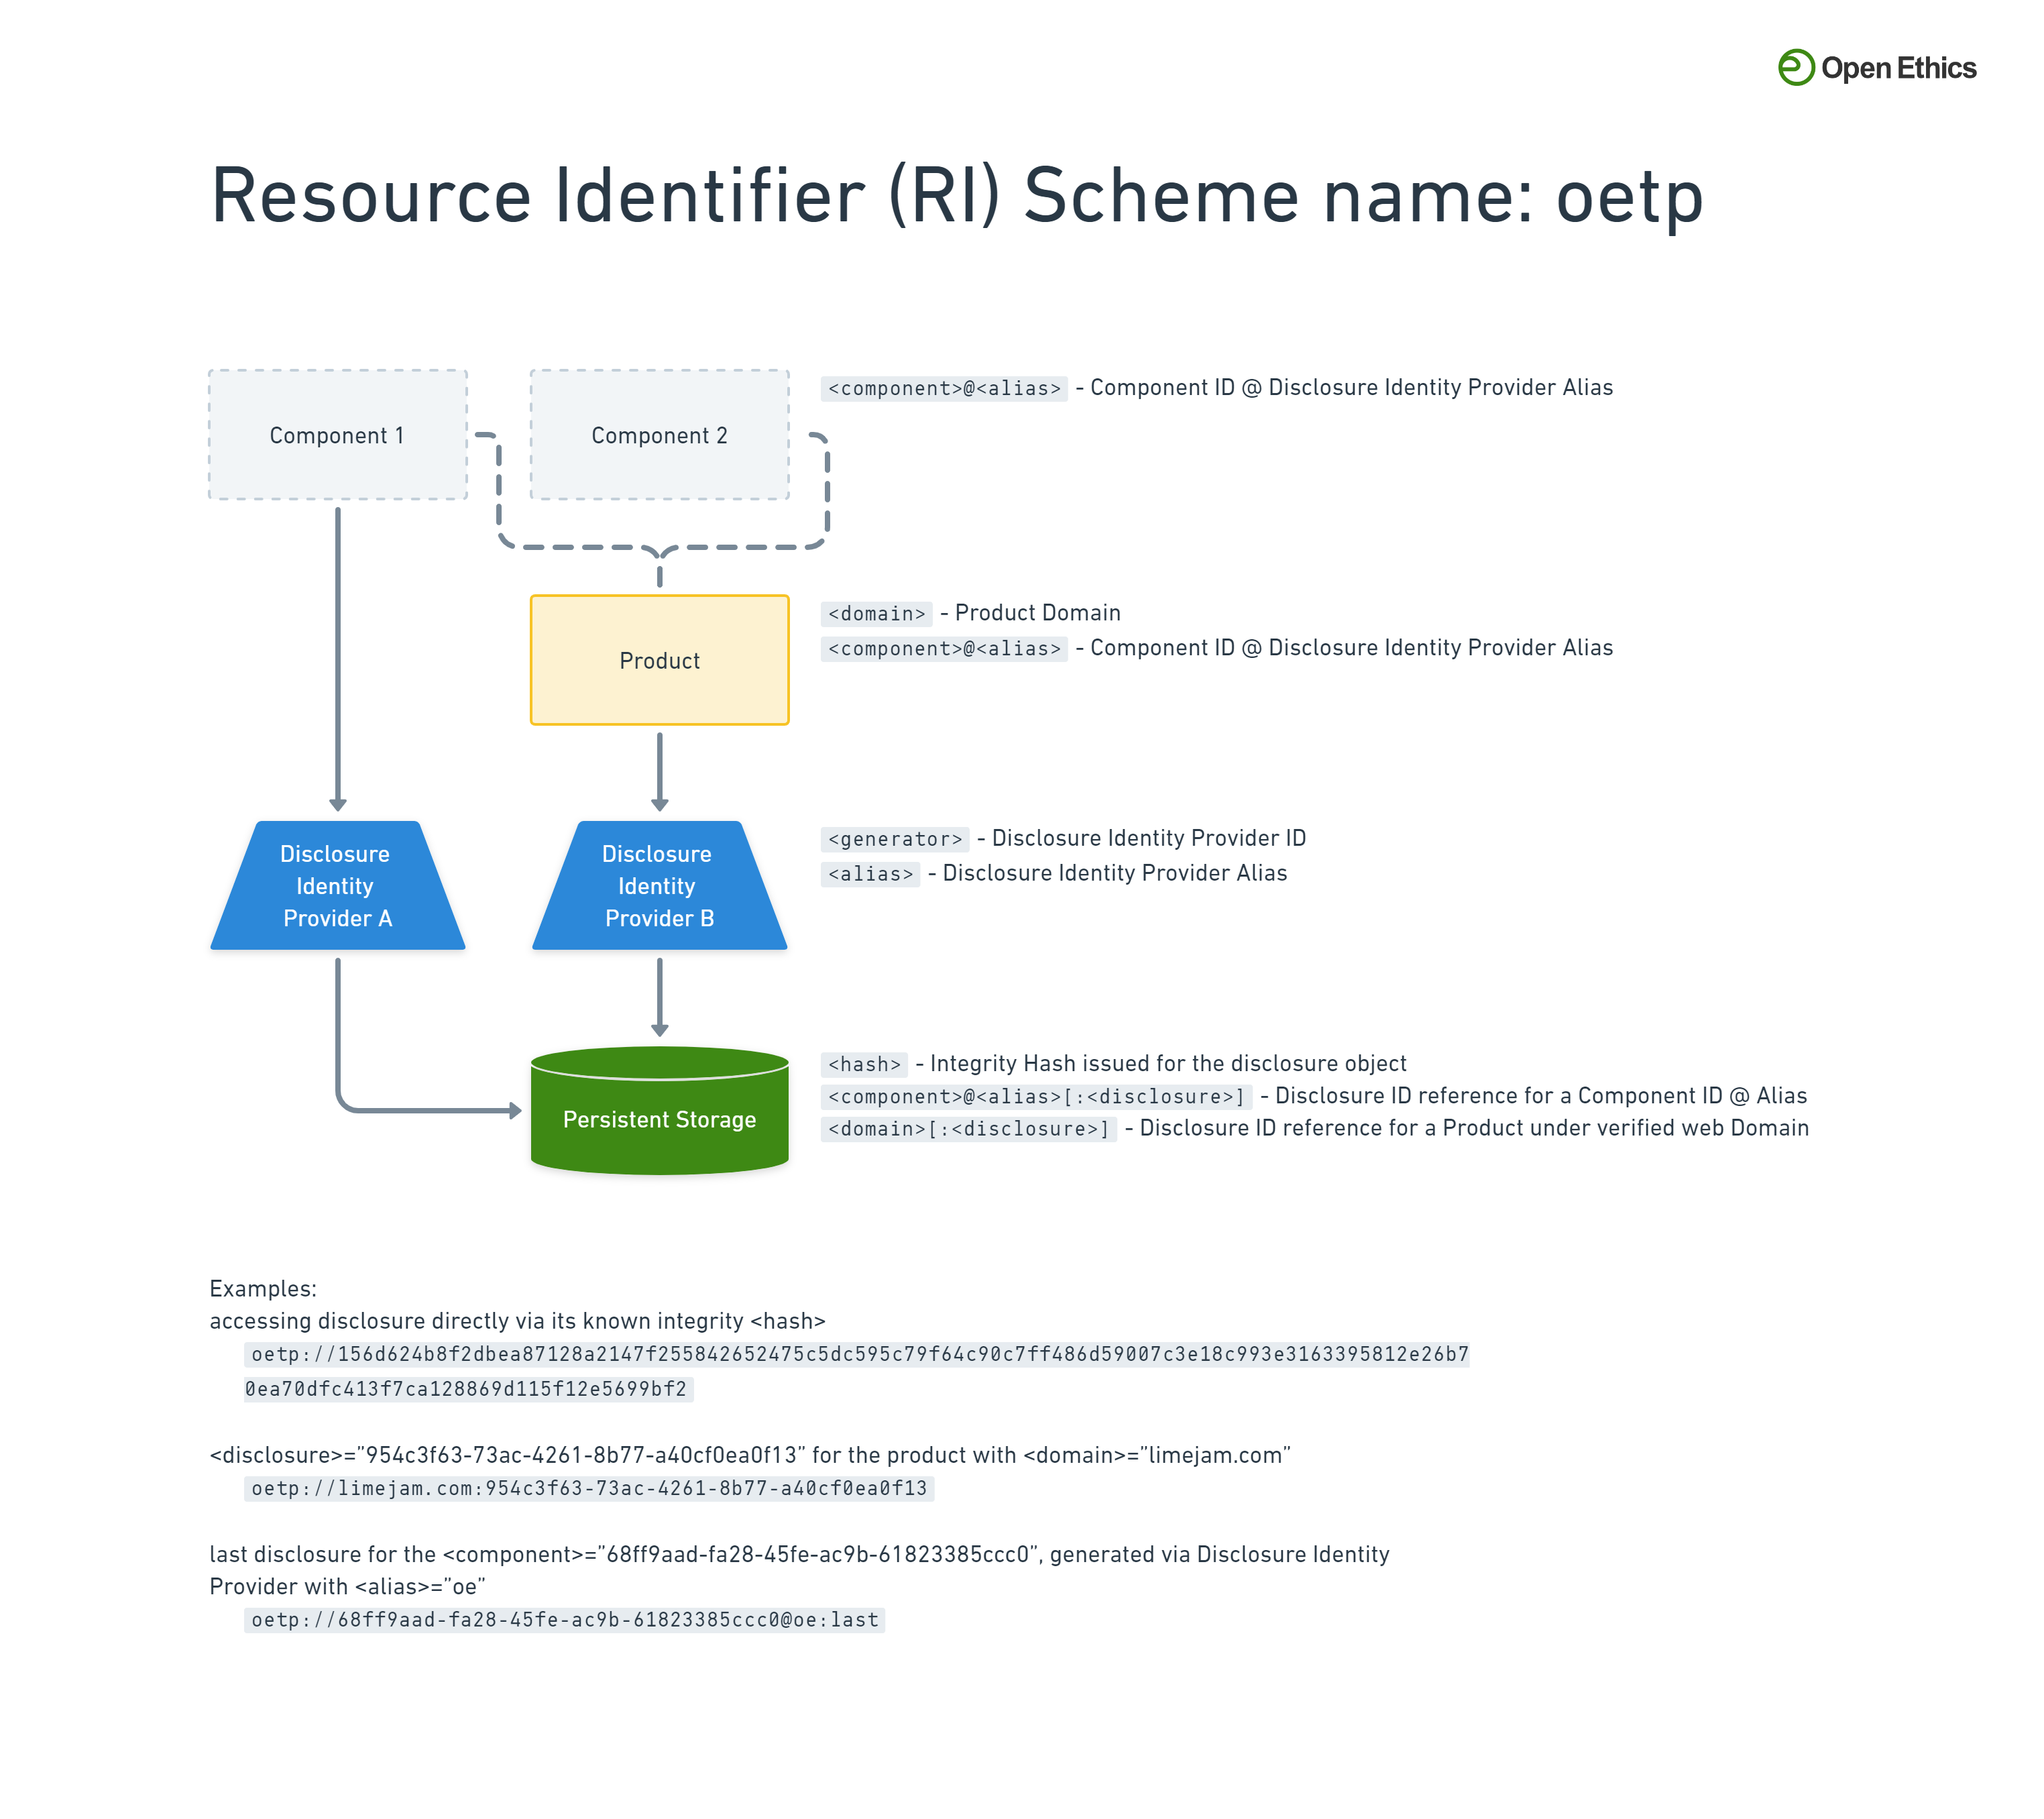 A diagram with examples of URI schemes for disclosures of the products' components performed via Disclosure Identity Providers